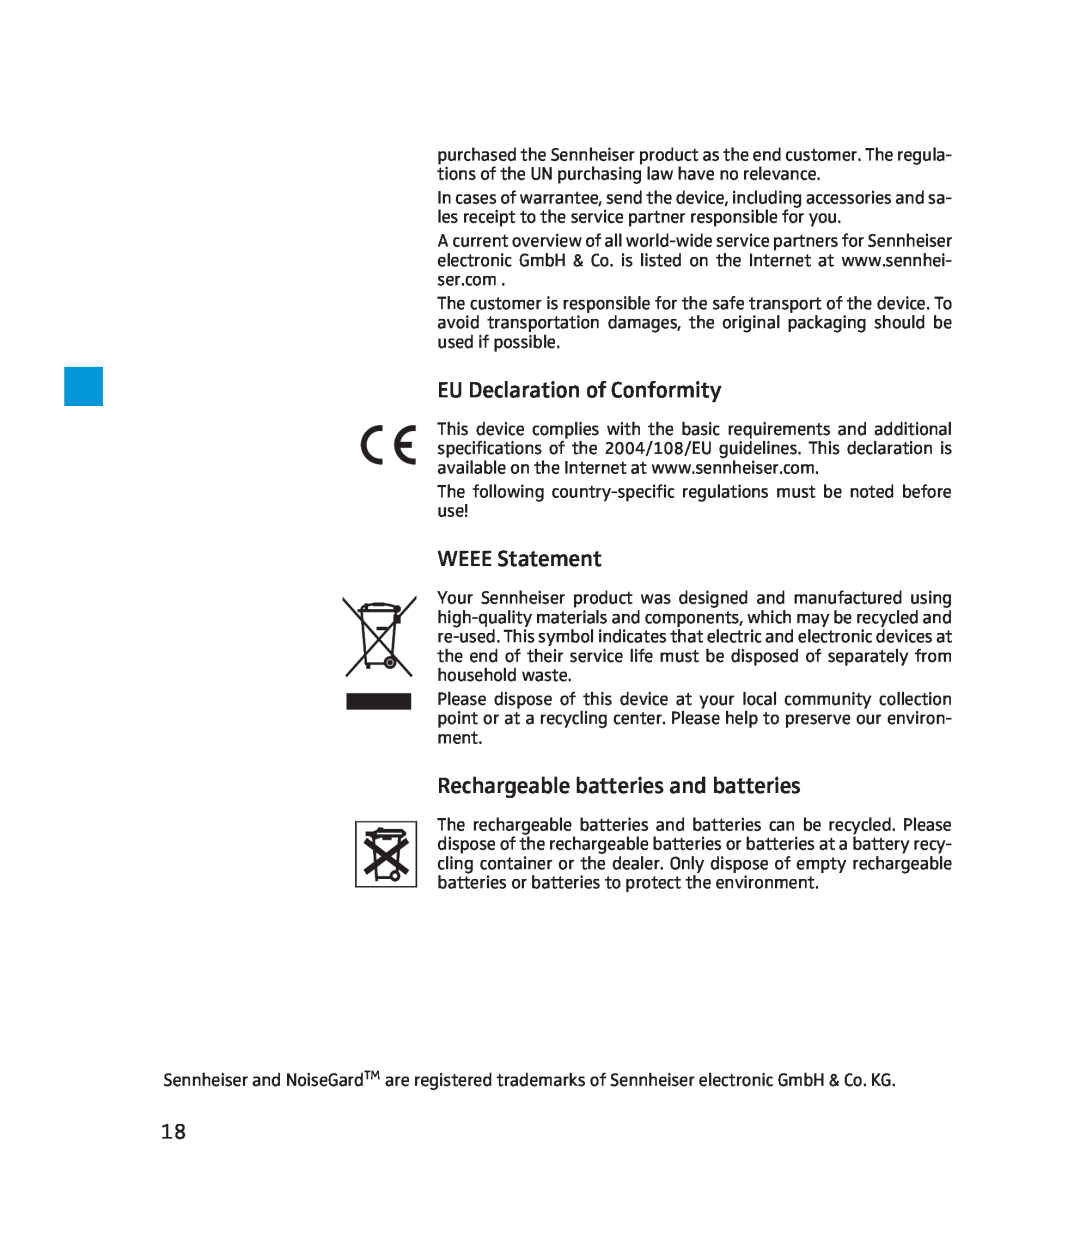 Sennheiser 500643 instruction manual EU Declaration of Conformity, WEEE Statement, Rechargeable batteries and batteries 